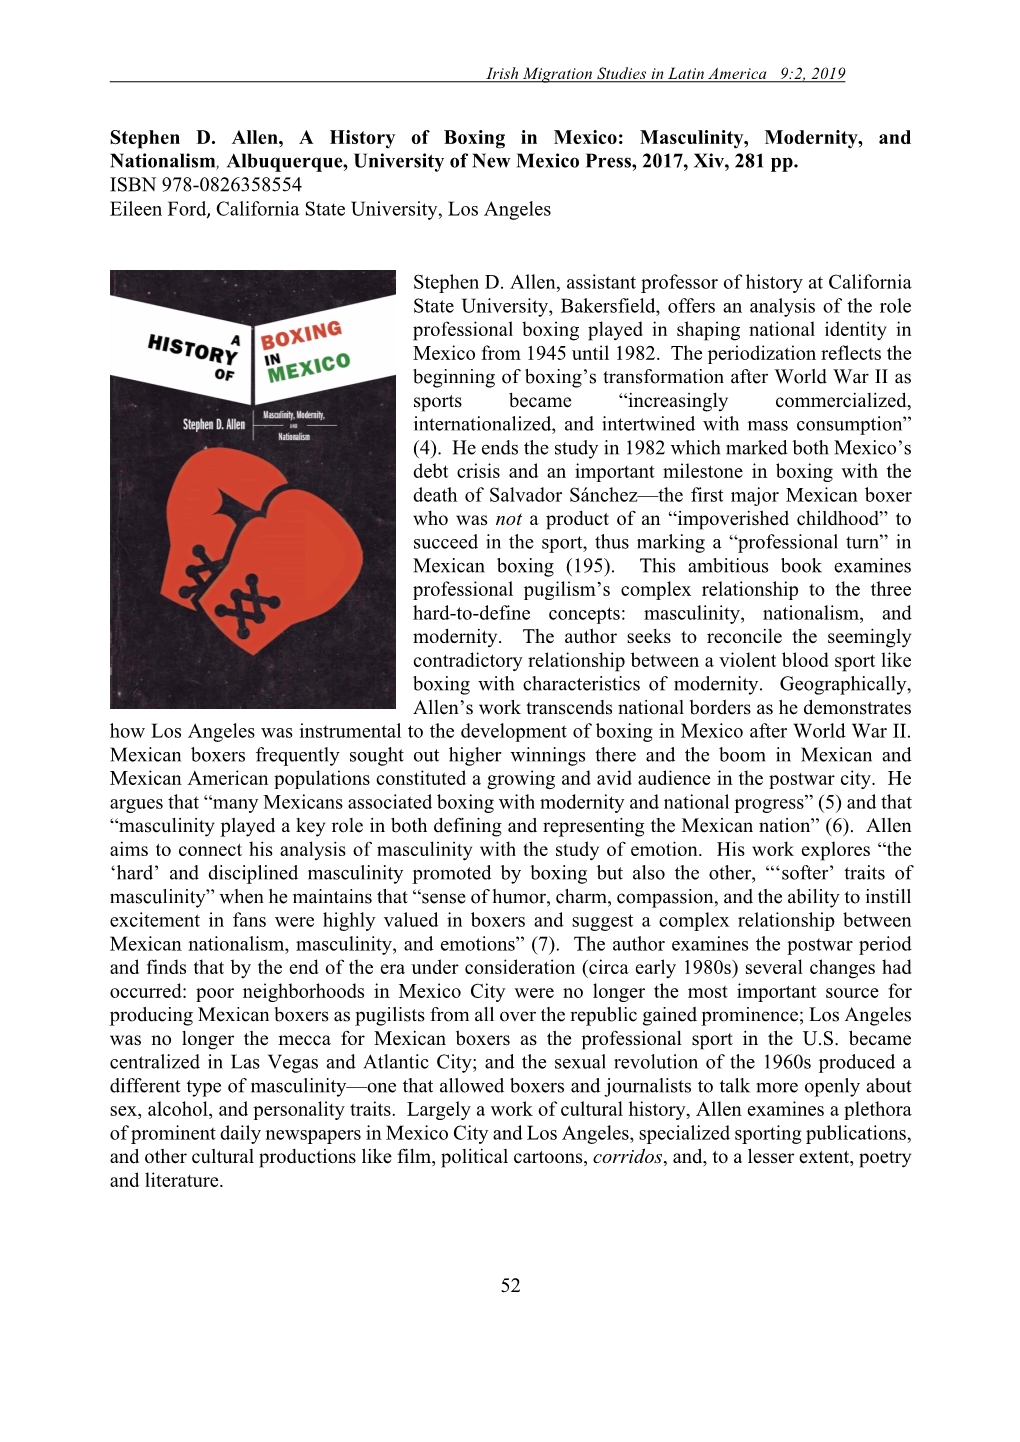 Stephen D. Allen, a History of Boxing in Mexico: Masculinity, Modernity, and Nationalism, Albuquerque, University of New Mexico Press, 2017, Xiv, 281 Pp